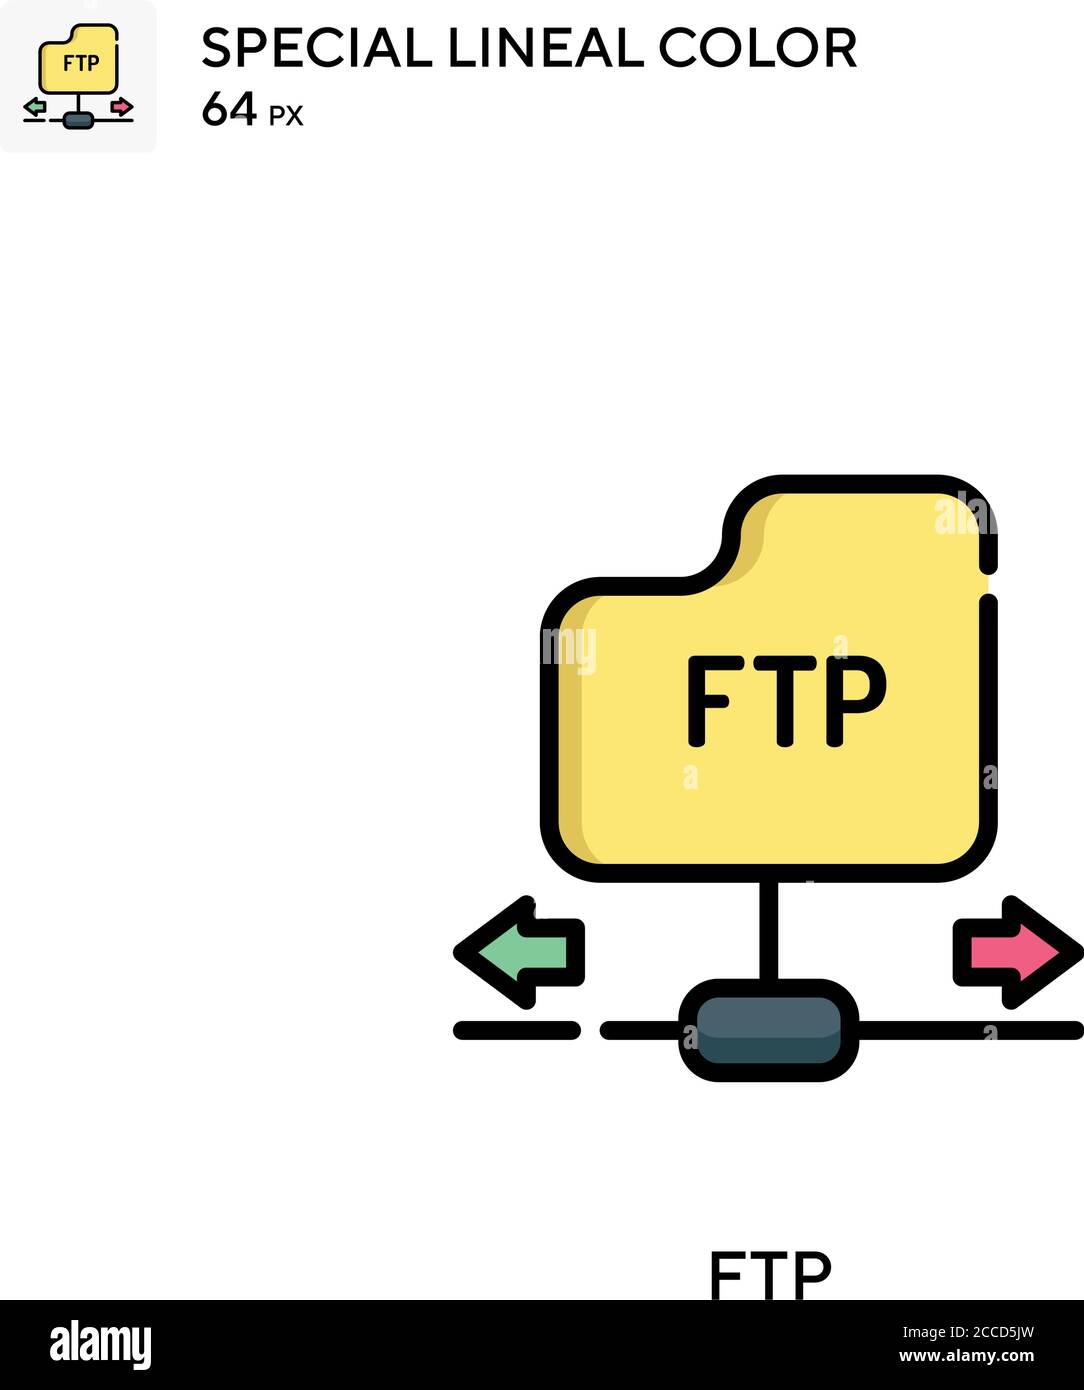 Ftp Special lineal color icon. Illustration symbol design template for ...